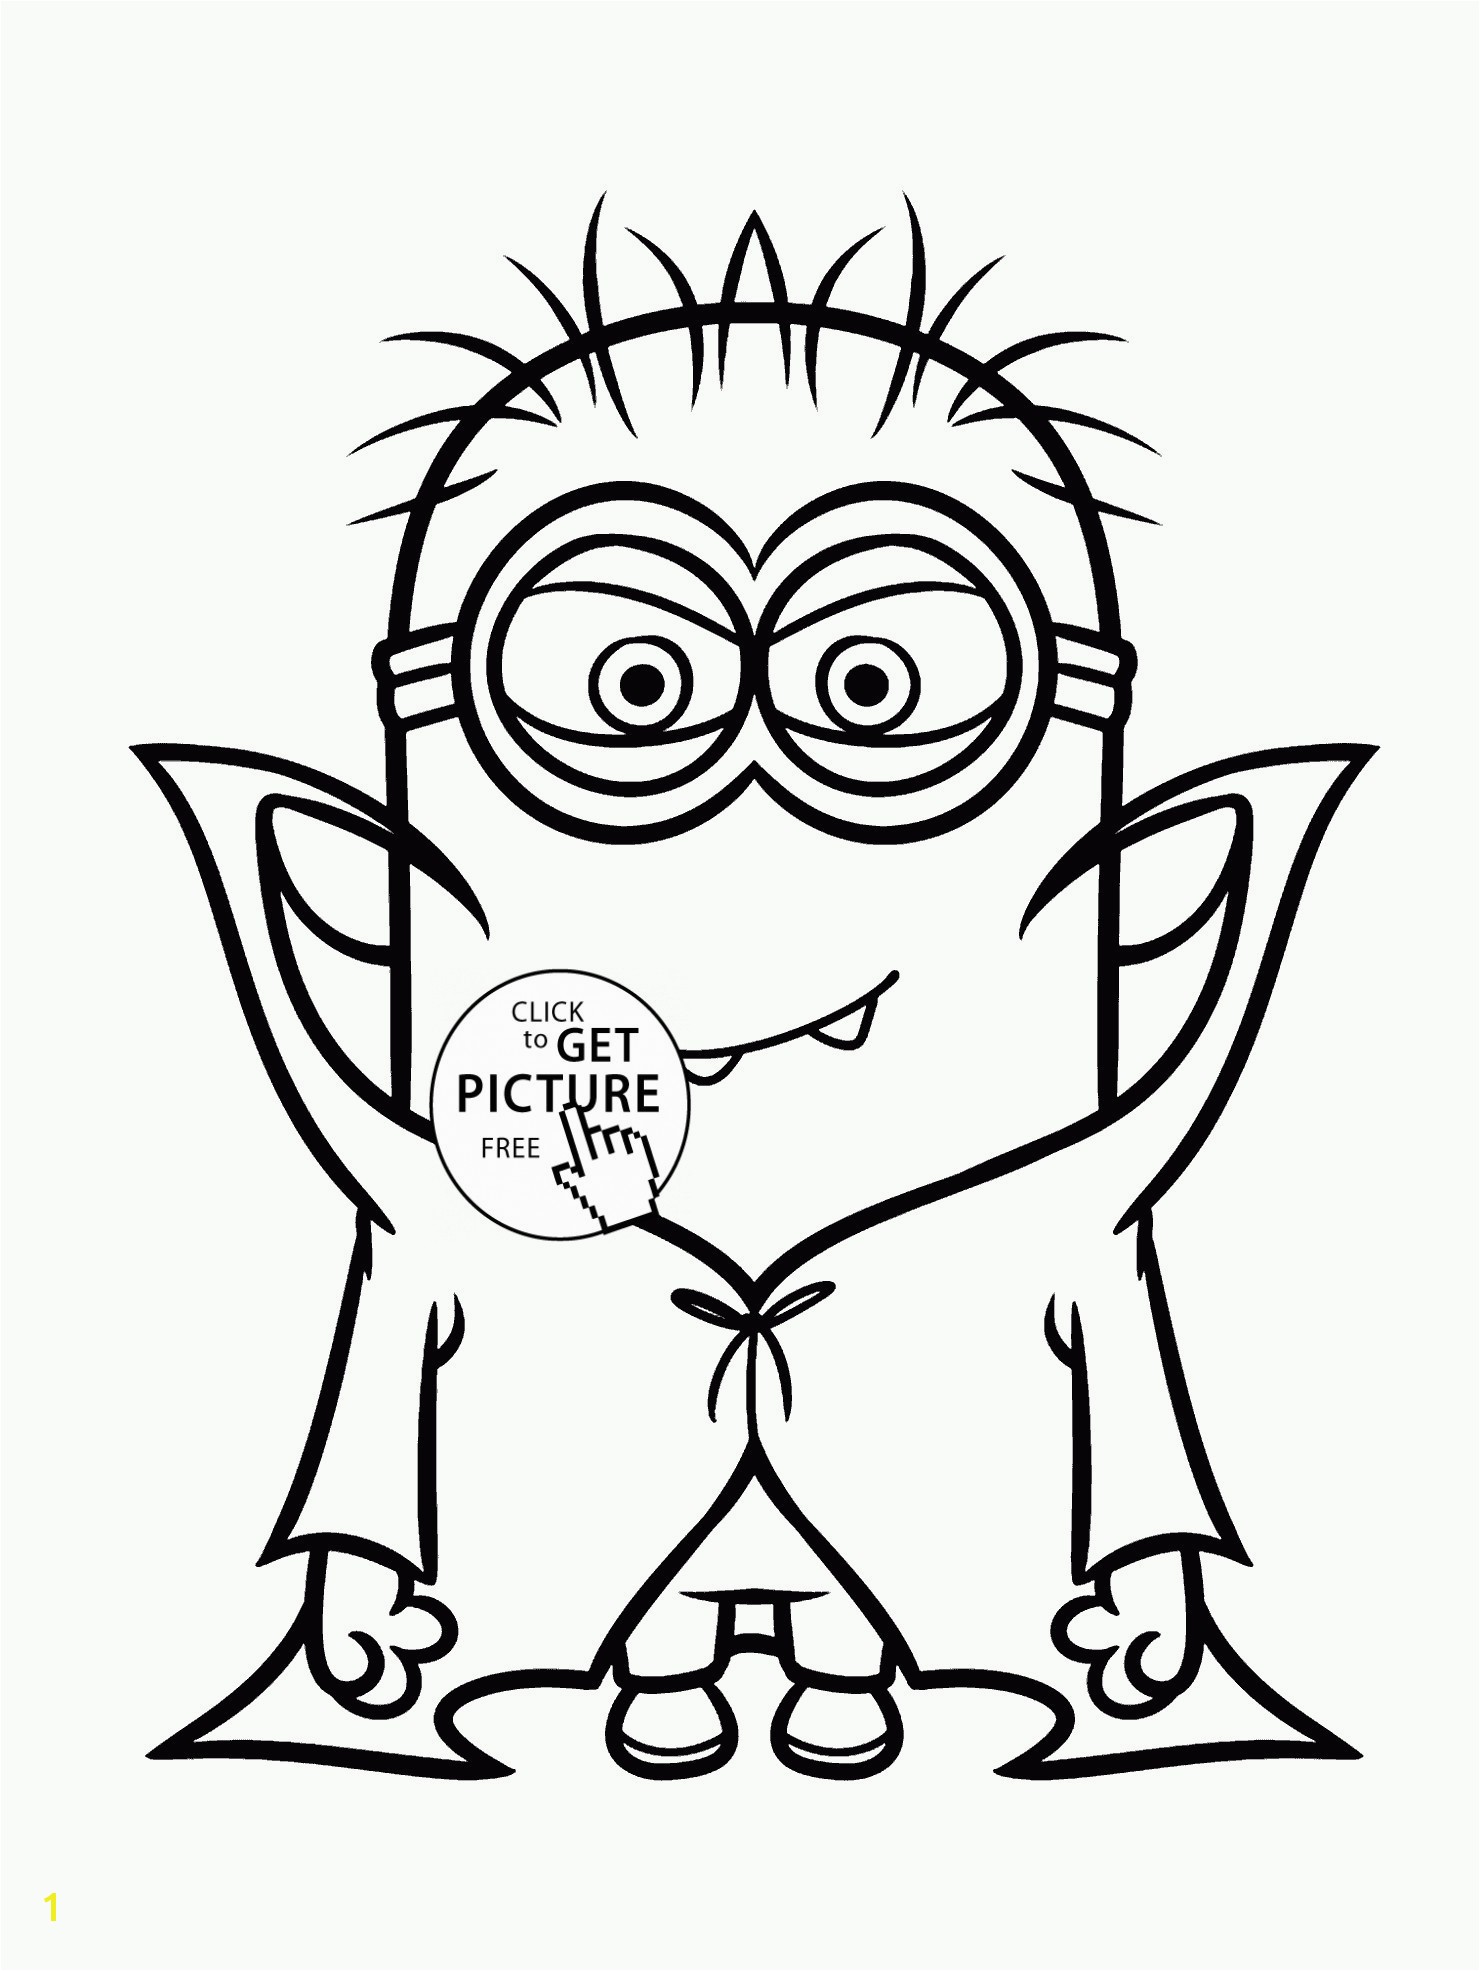 Preschool Halloween Coloring Pages Free Halloween Coloring Pages for Kids Printable Printable Home